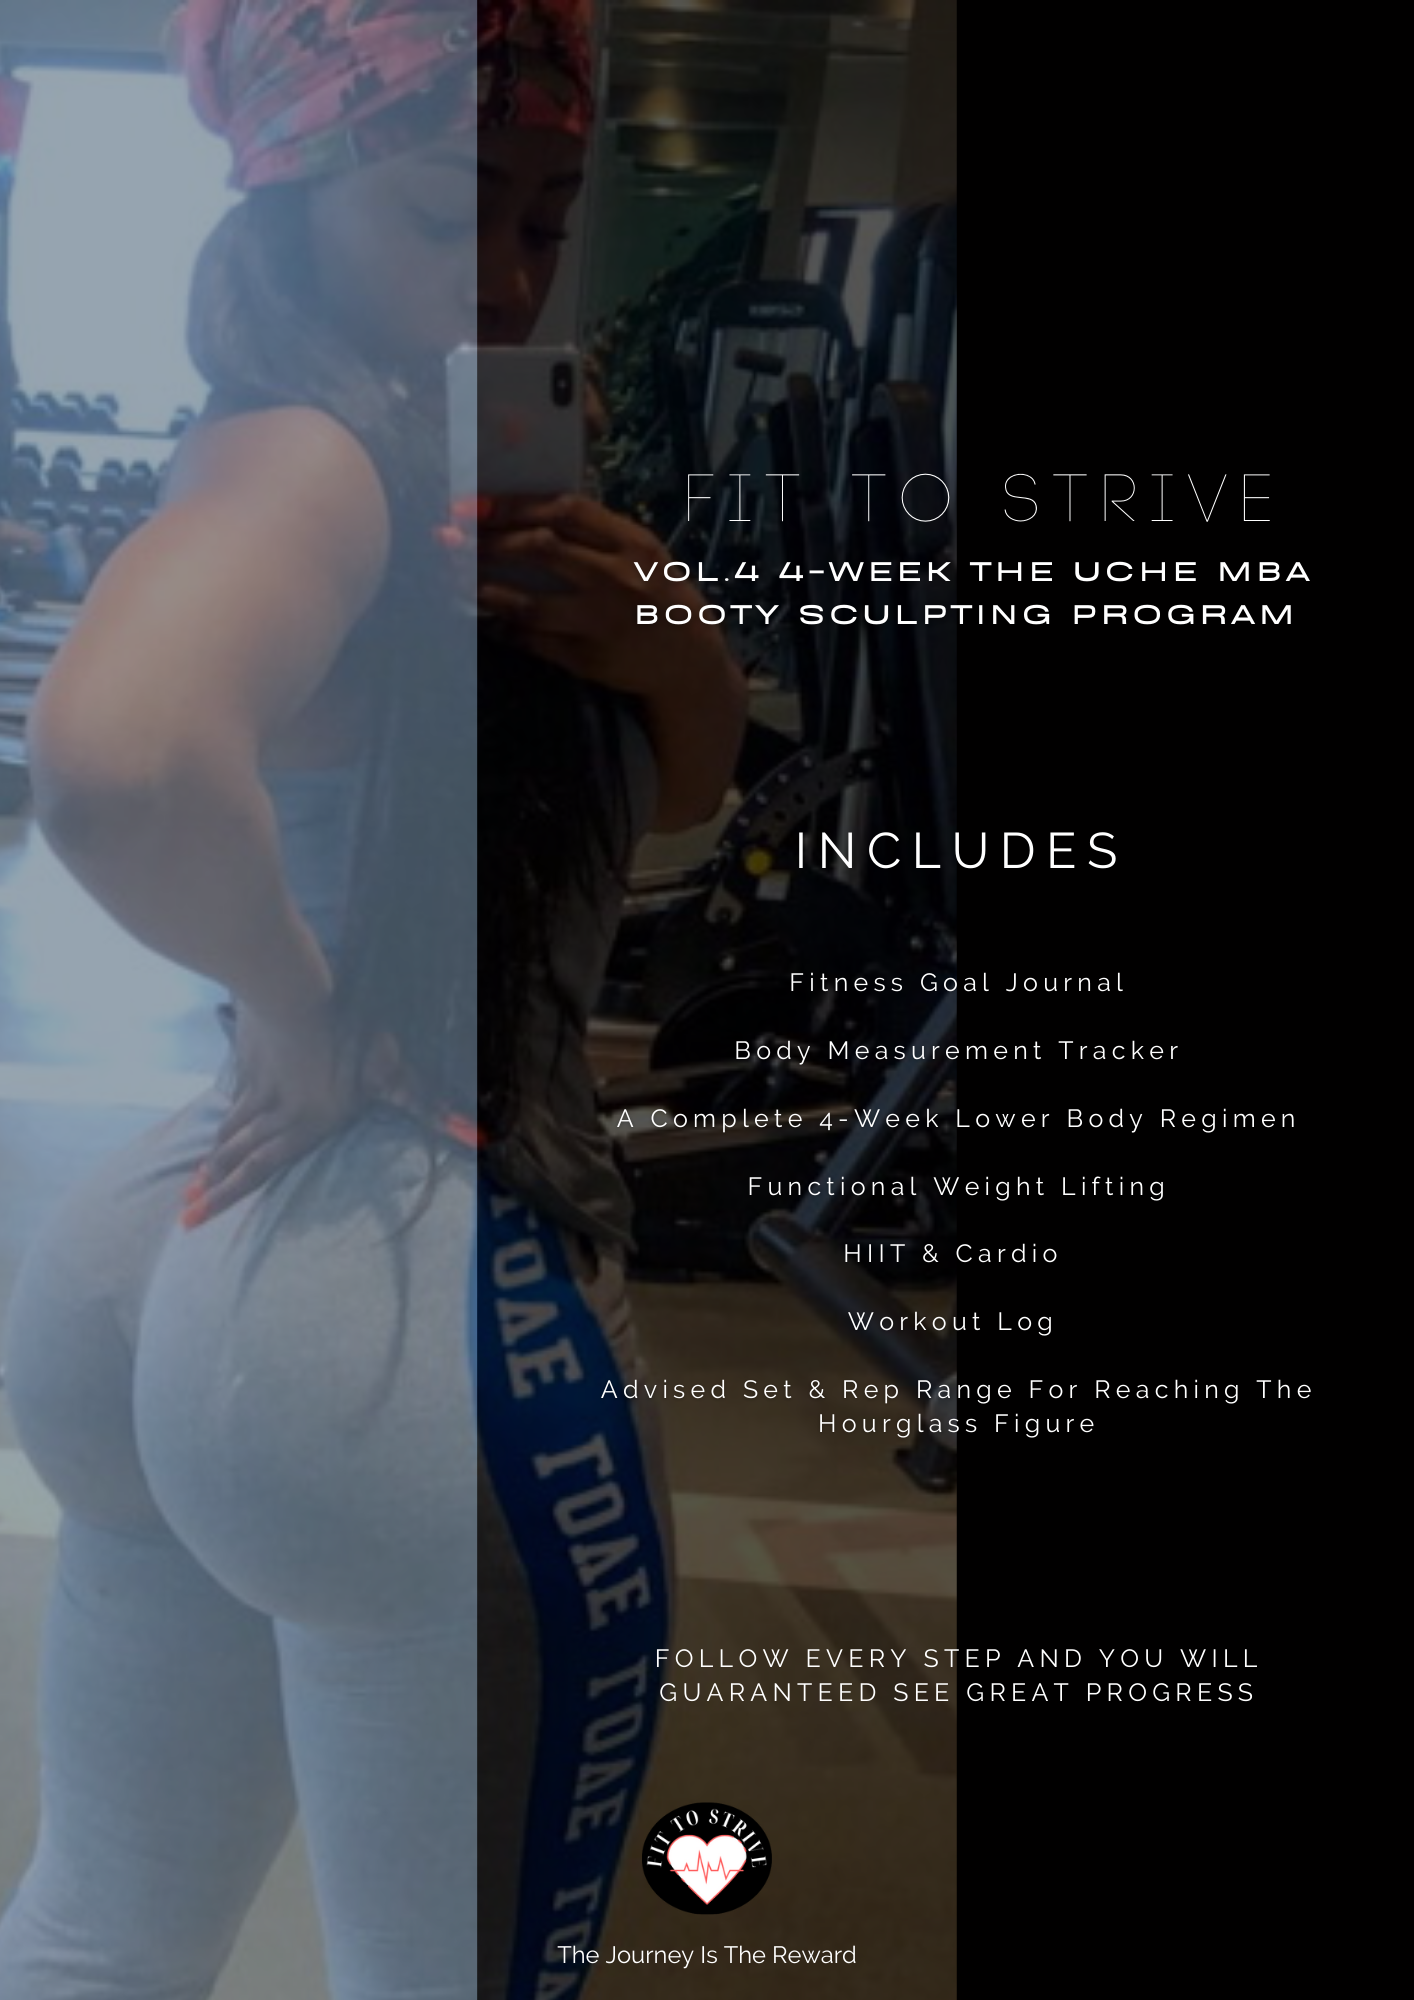 Workout Plan Vol.4 - The Uche Mba Booty Sculpting Program